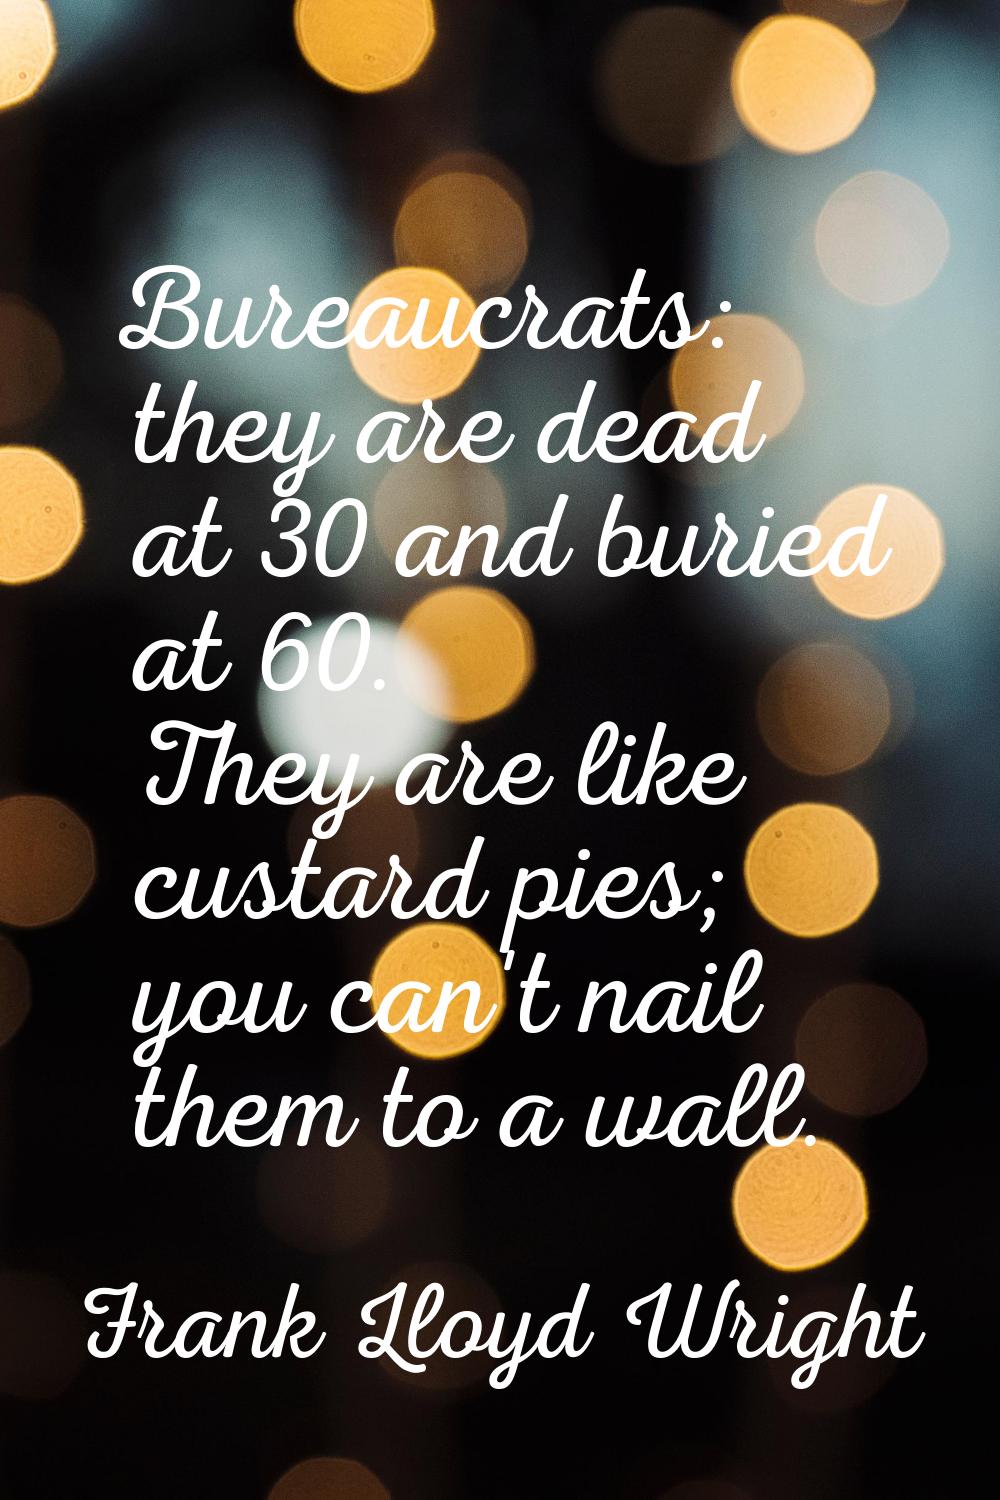 Bureaucrats: they are dead at 30 and buried at 60. They are like custard pies; you can't nail them 